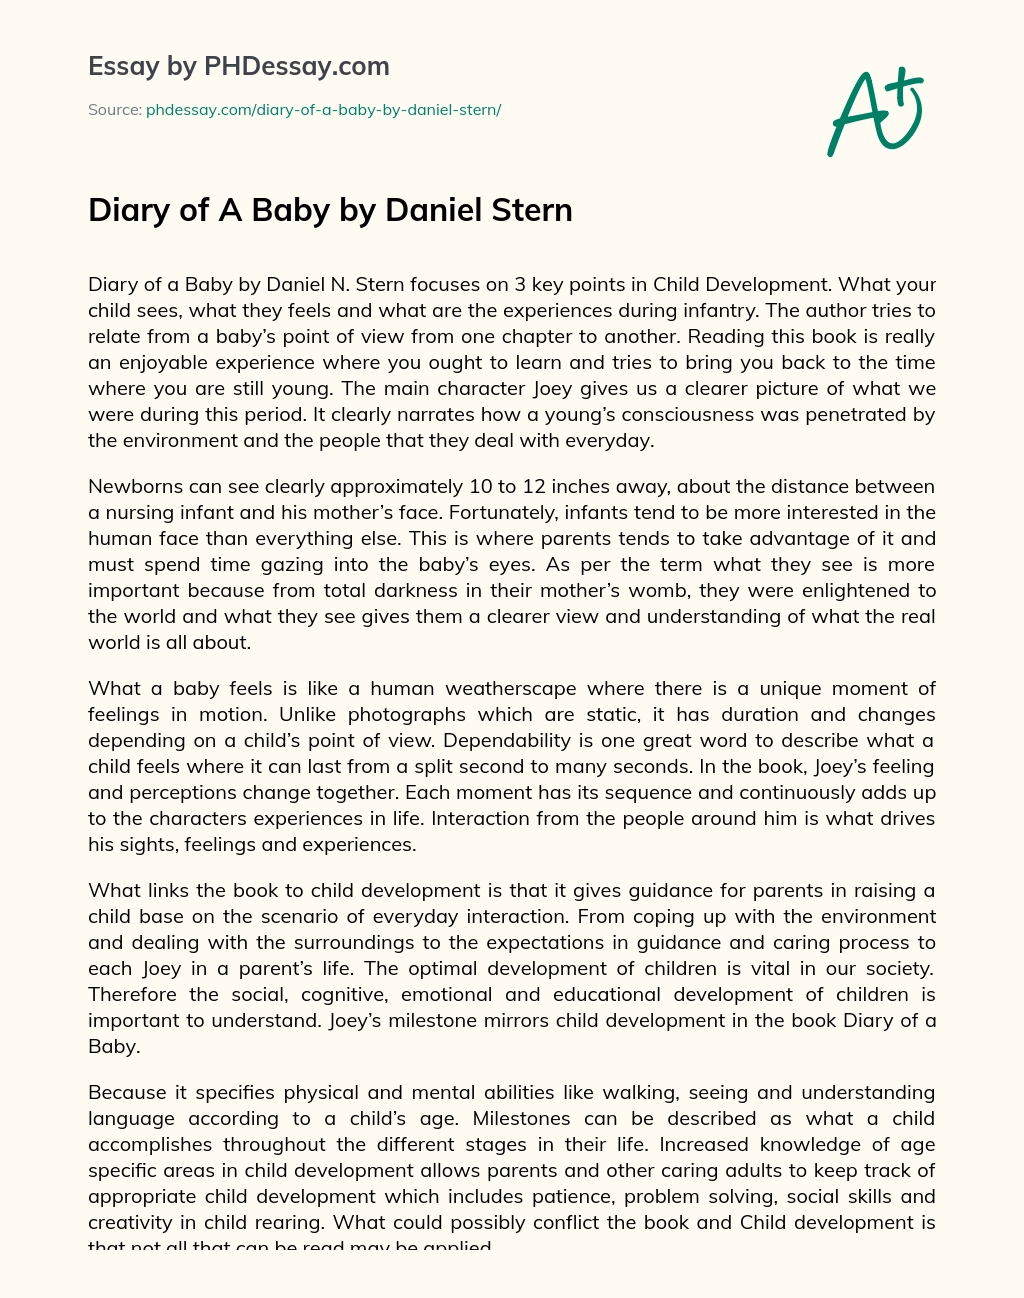 Diary of A Baby by Daniel Stern essay